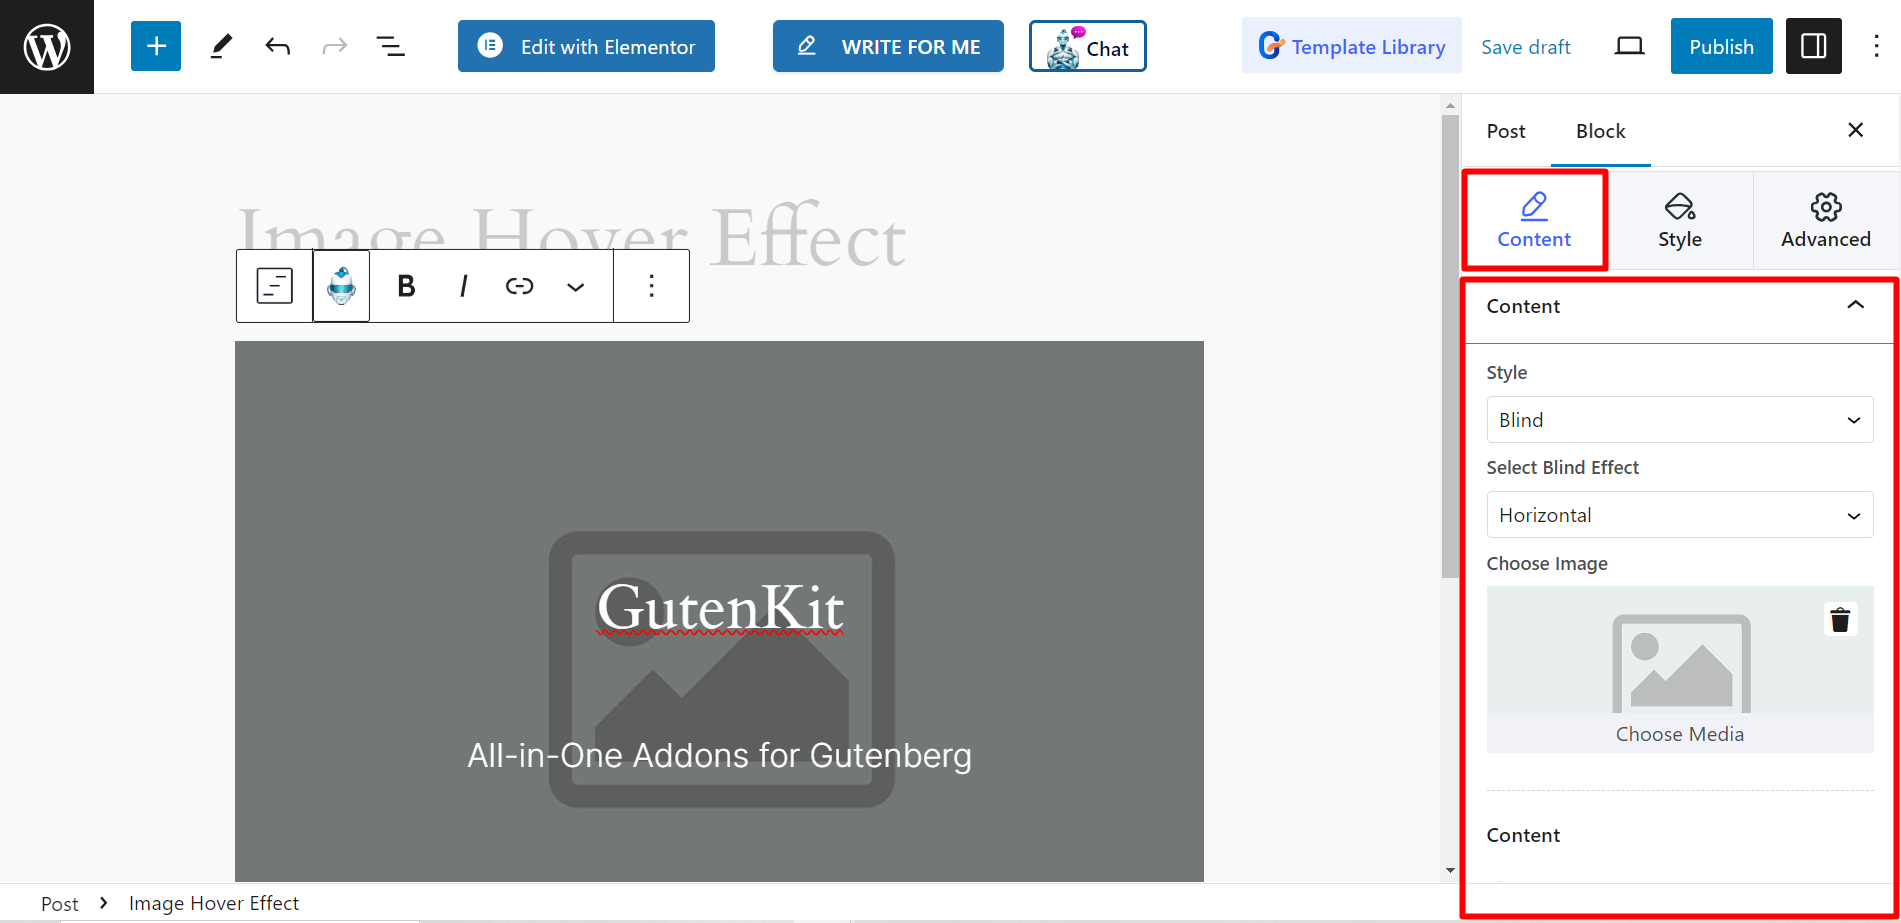 Customizing the content of GutenKit Image Hover Effect block